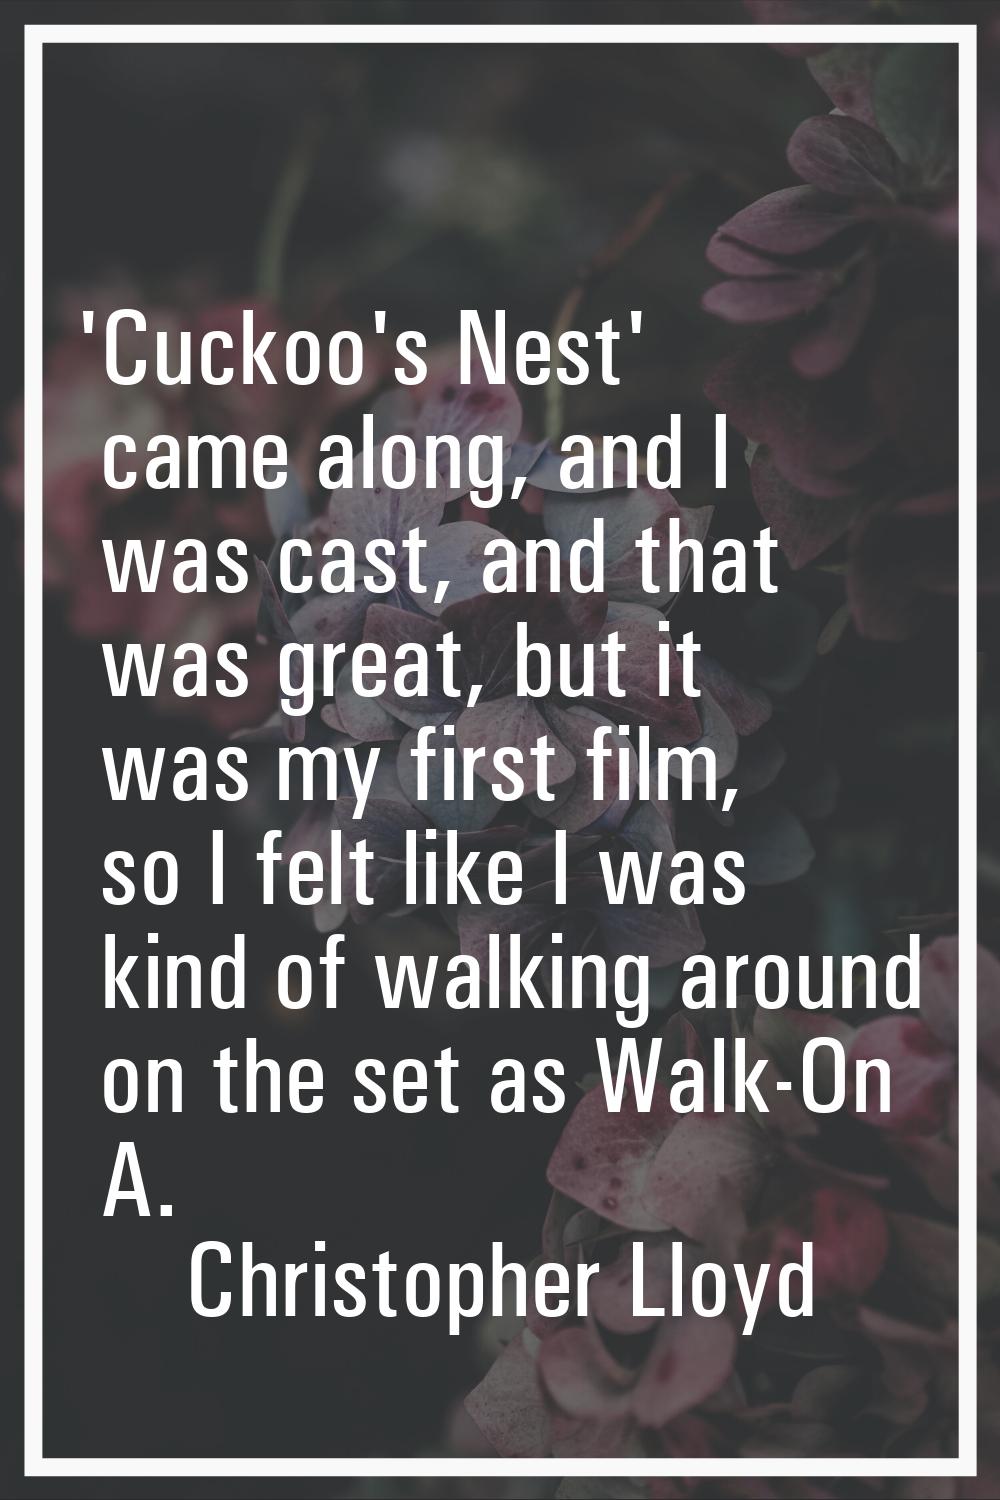 'Cuckoo's Nest' came along, and I was cast, and that was great, but it was my first film, so I felt